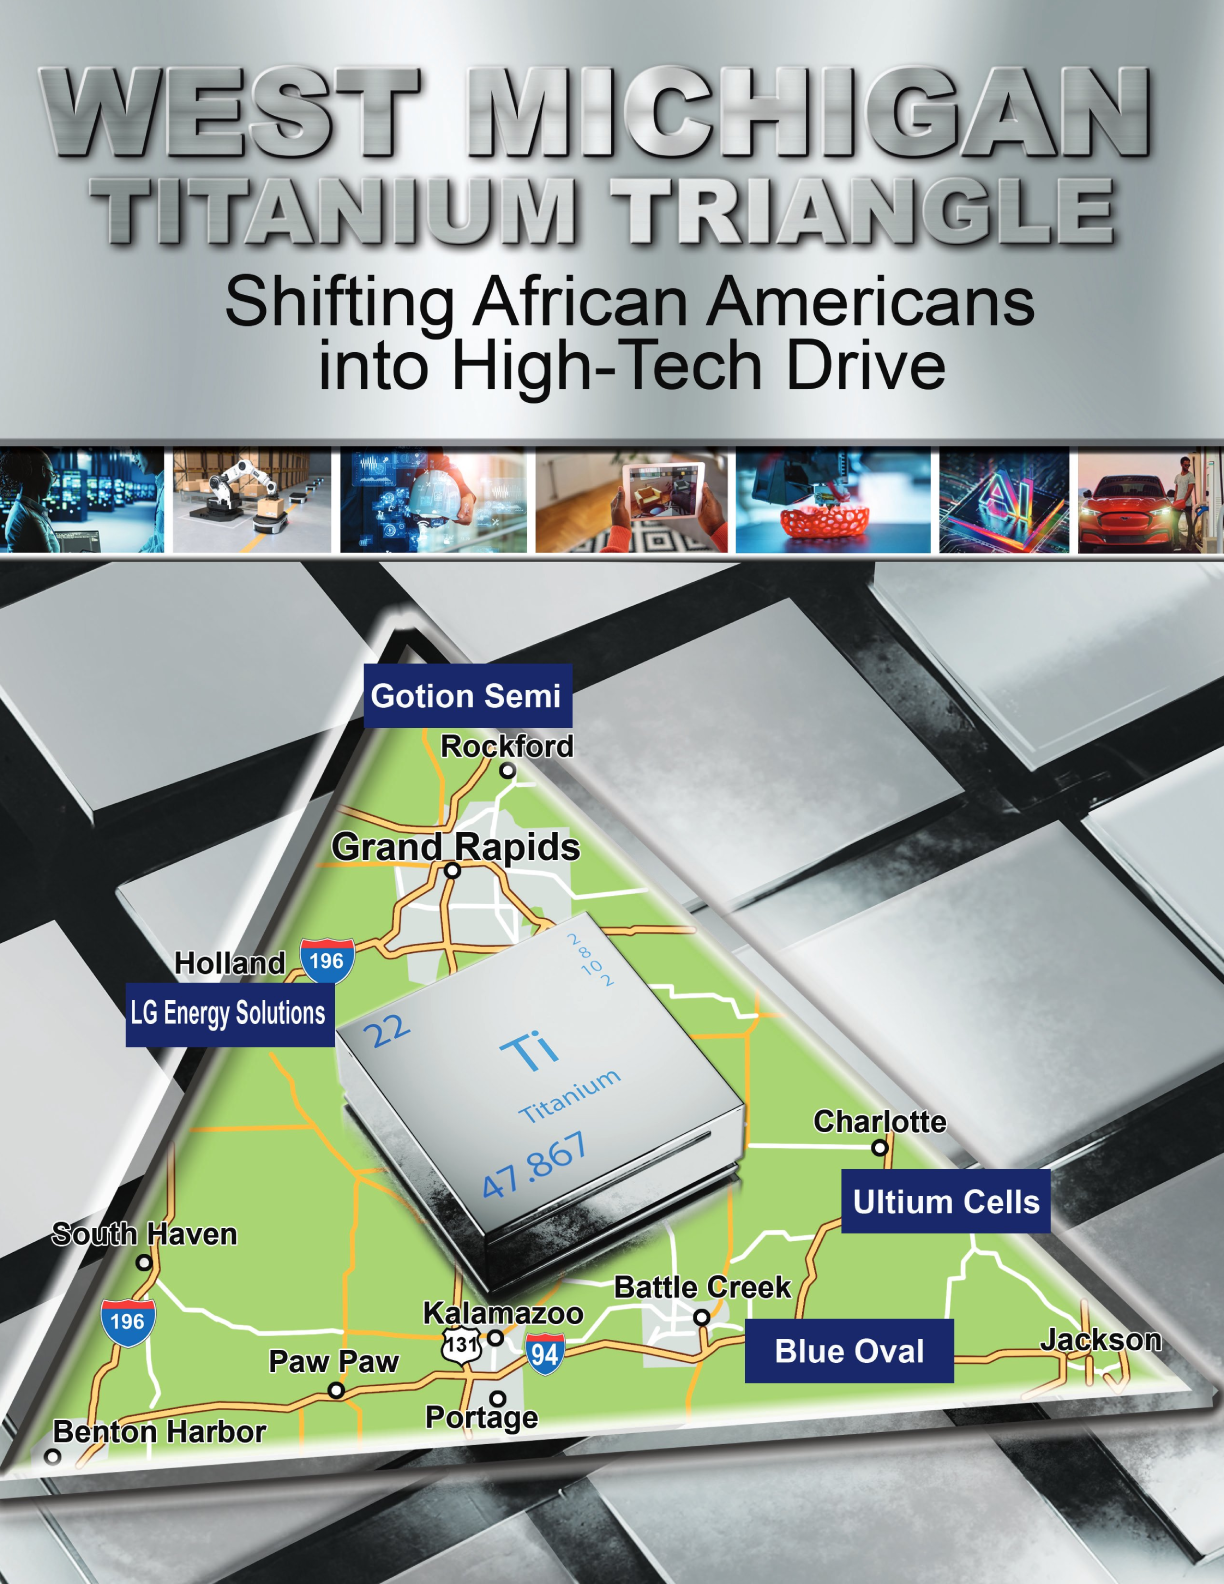 WEST MICHIGAN TITANIUM TRIANGLE – SHIFTING AFRICAN AMERICANS INTO HIGH-TECH DRIVE